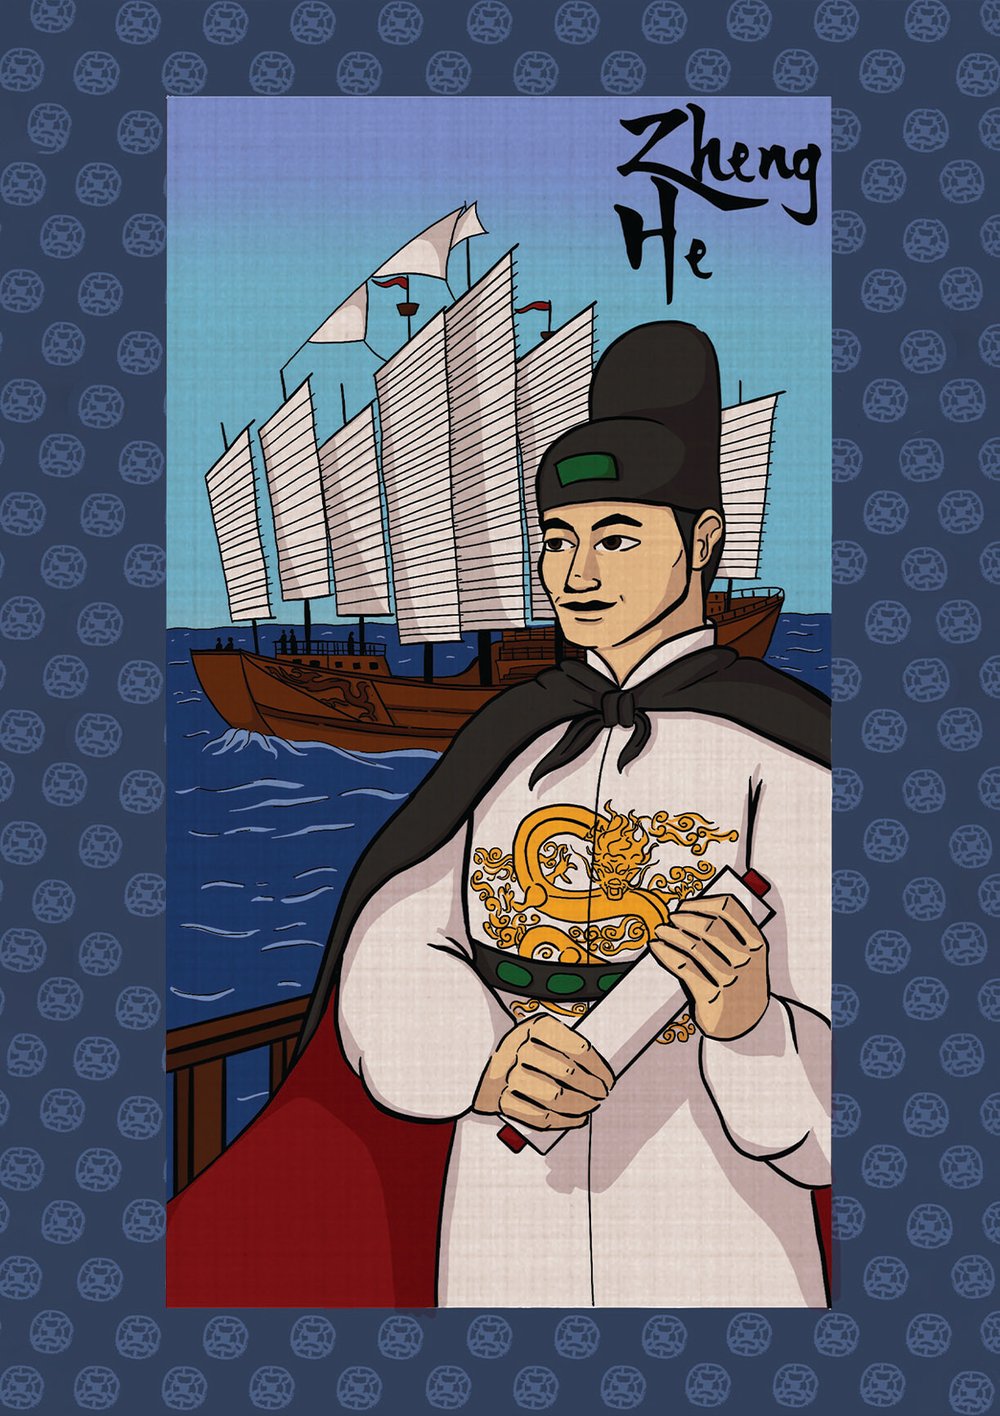 Image of Zheng He - Muslims in History